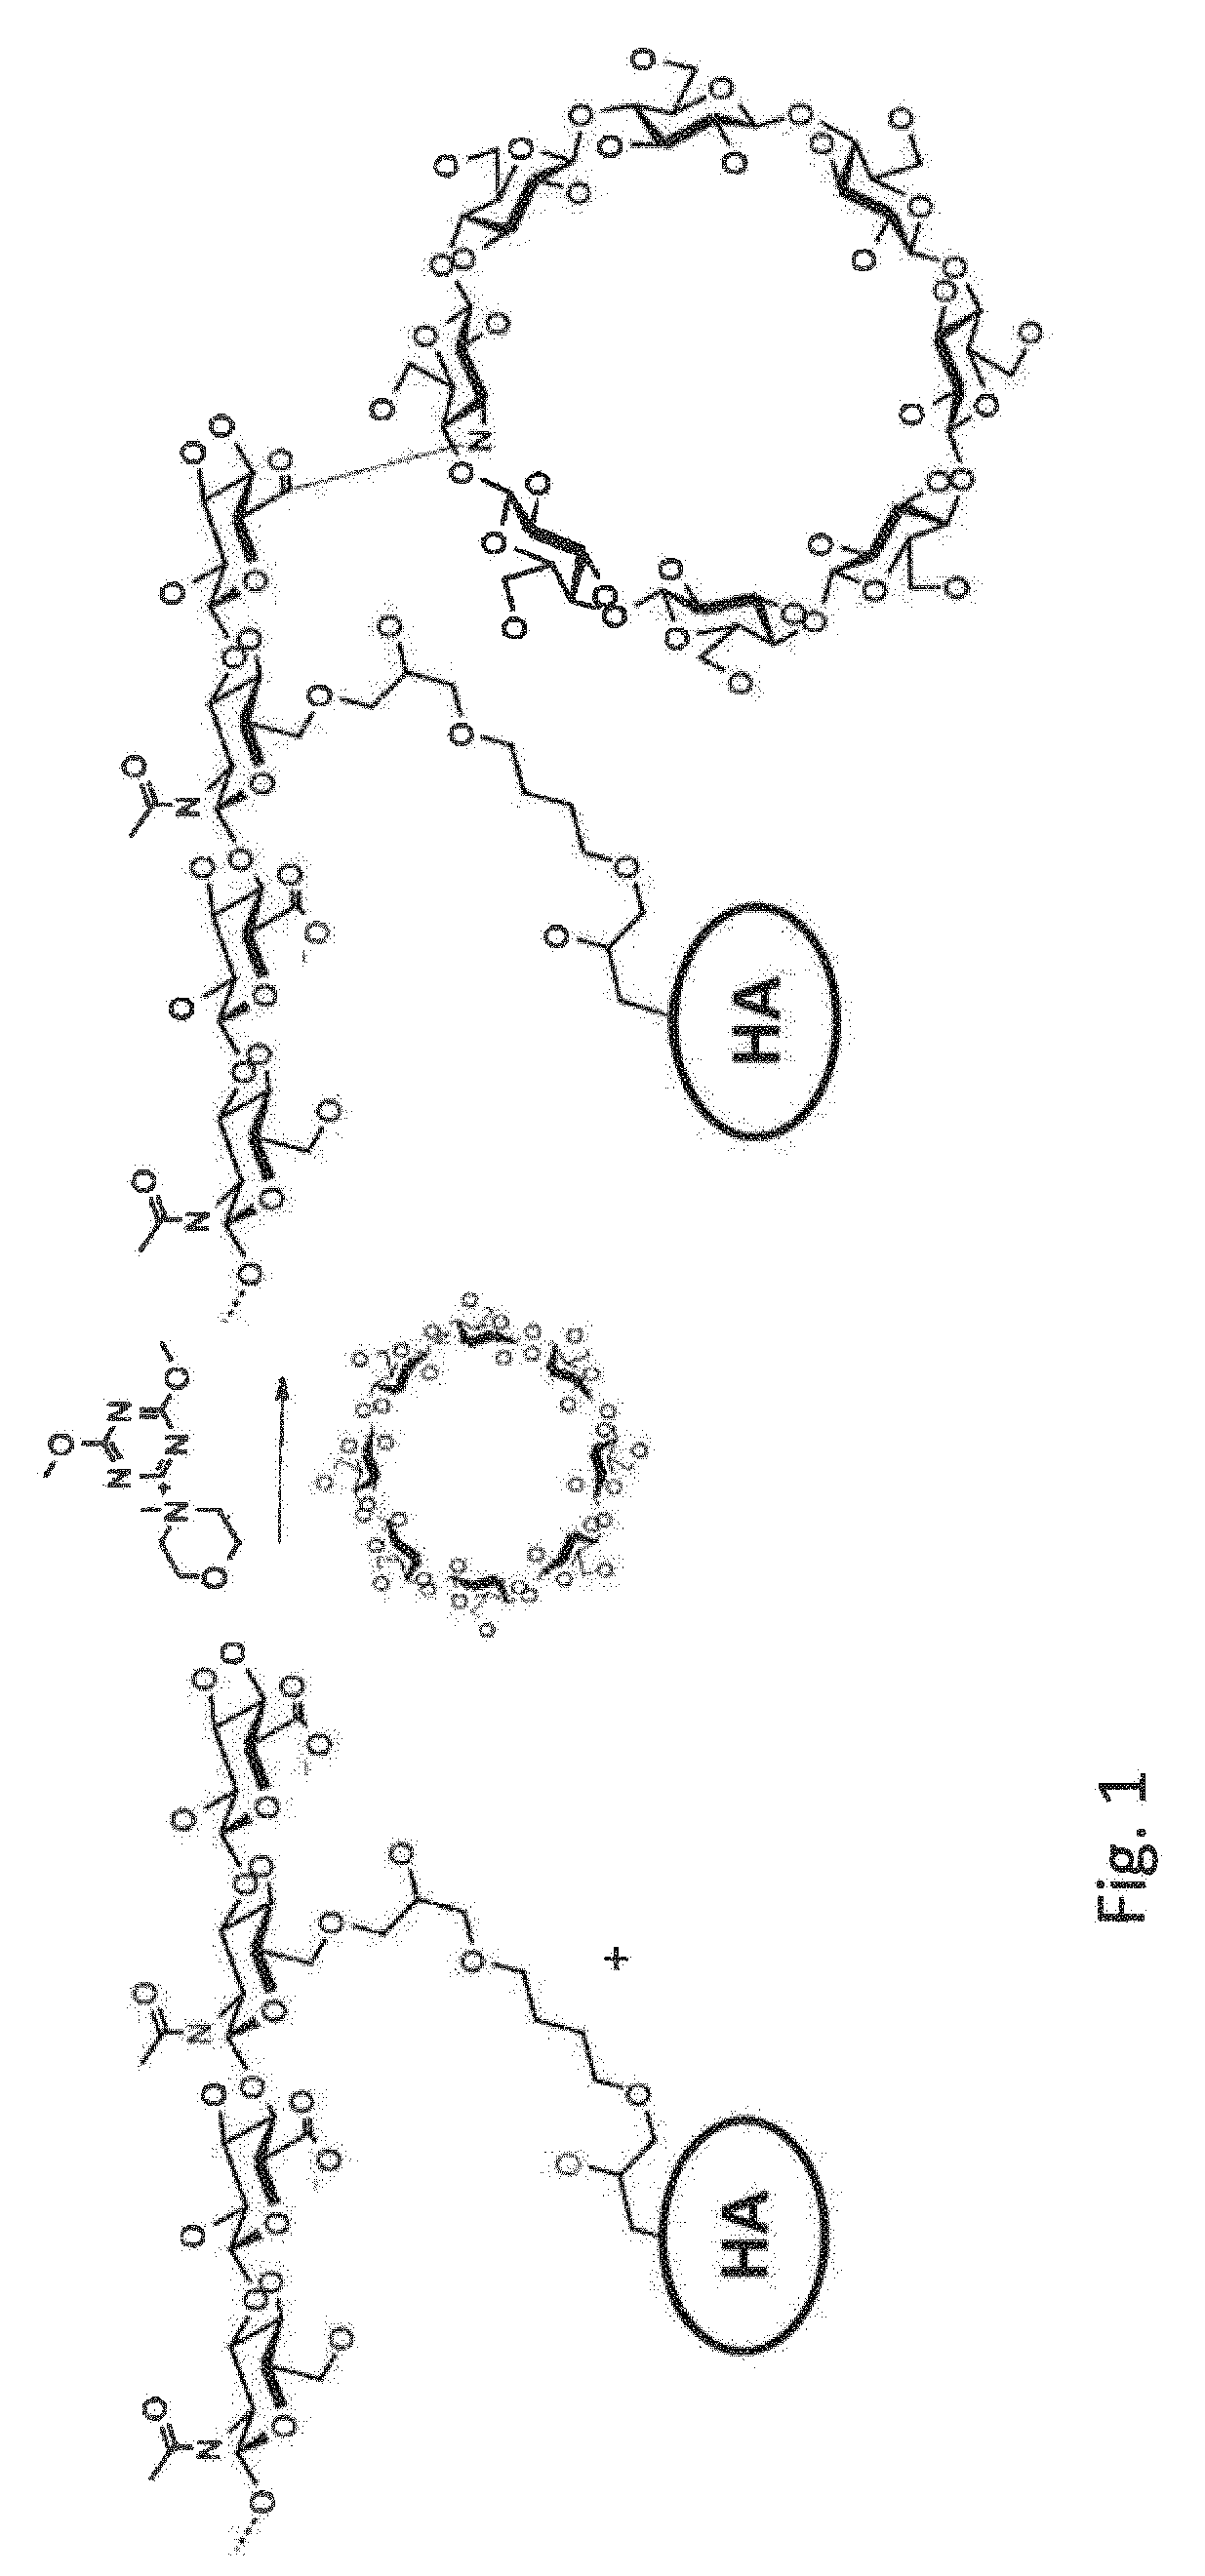 Cyclodextrin-grafted cross-linked hyaluronic acid complexed with active drug substances and uses thereof